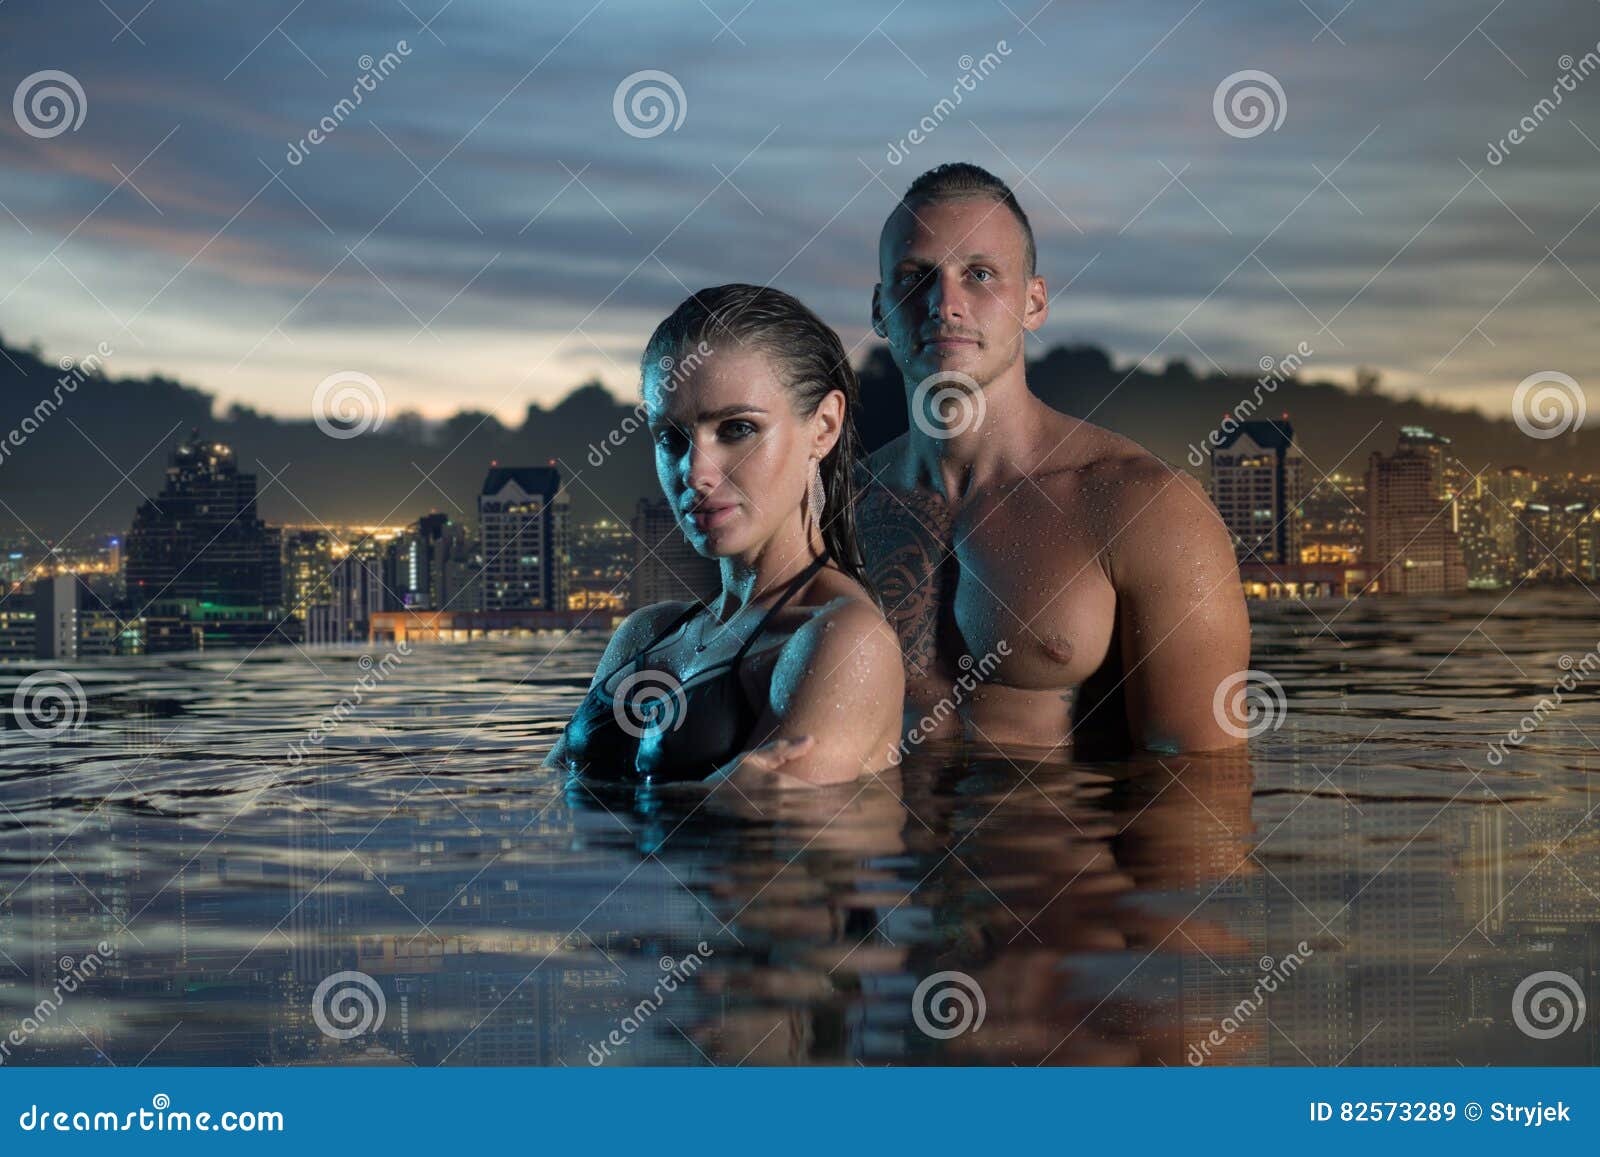 Romantic Couple Alone In Infinity Swimming Pool Stock Image Image Of